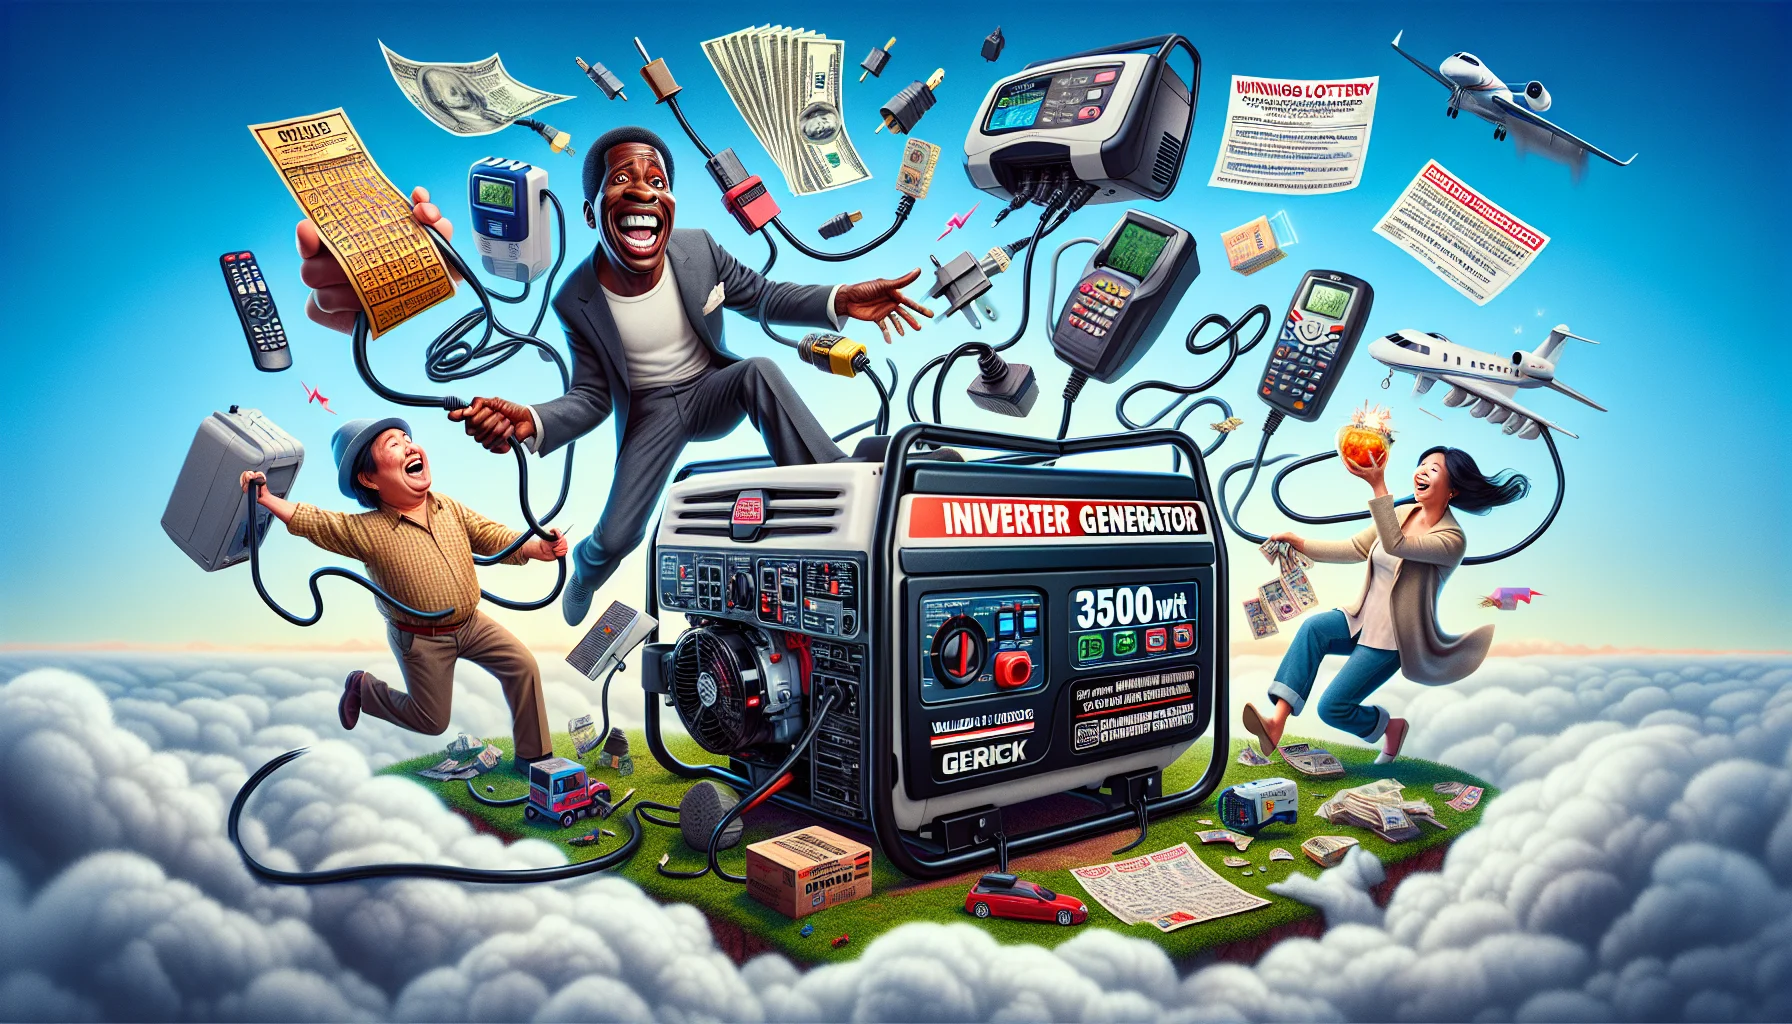 Picture a humorous setting featuring a widely-used, sturdy 3500-watt inverter generator. An African-American man, oozing charisma, and an East Asian woman, with an infectious smile, are in a comedic situation - the man is playfully struggling to plug in all sorts of domestic appliances like a massive TV and multiple game consoles into the generator, while the woman is holding winning lottery tickets and piles of written reviews praising the generator's efficiency. Above them, clouds are forming, mimicking their playful confusion. The scenario entices viewers about the limitless possibilities of generating their electricity.